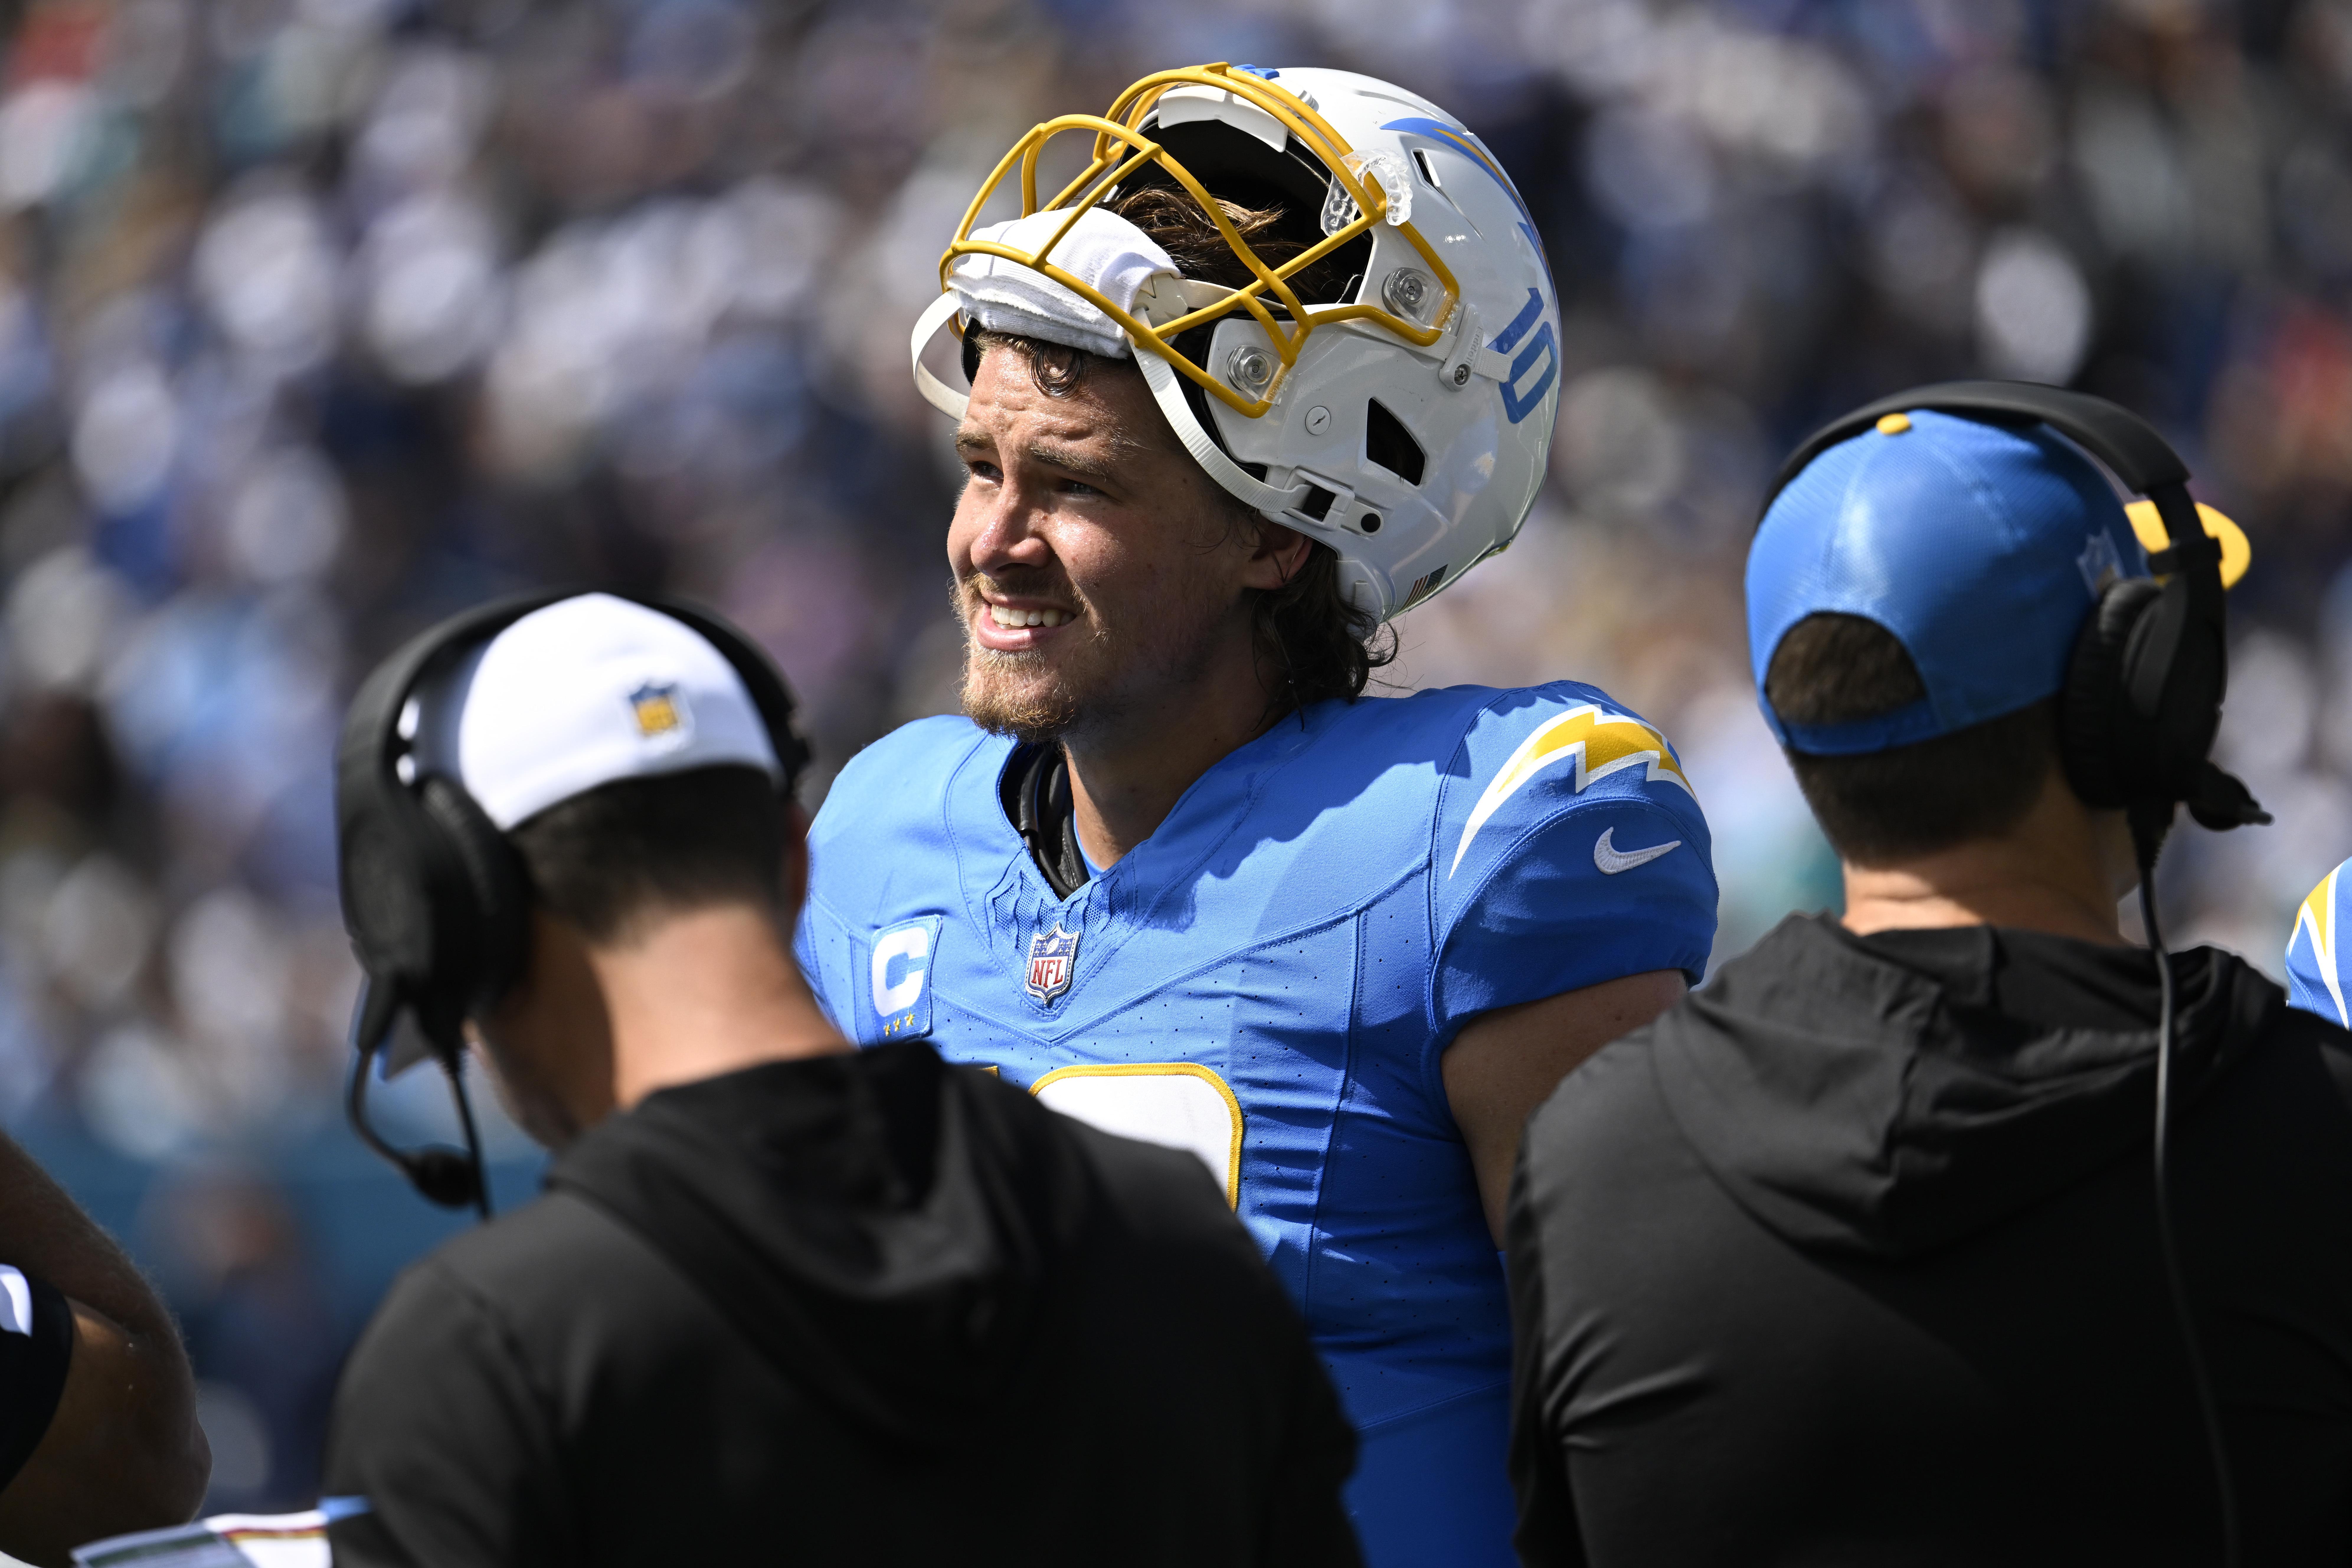 Los Angeles Chargers vs. Tennessee Titans: How to Watch, Listen